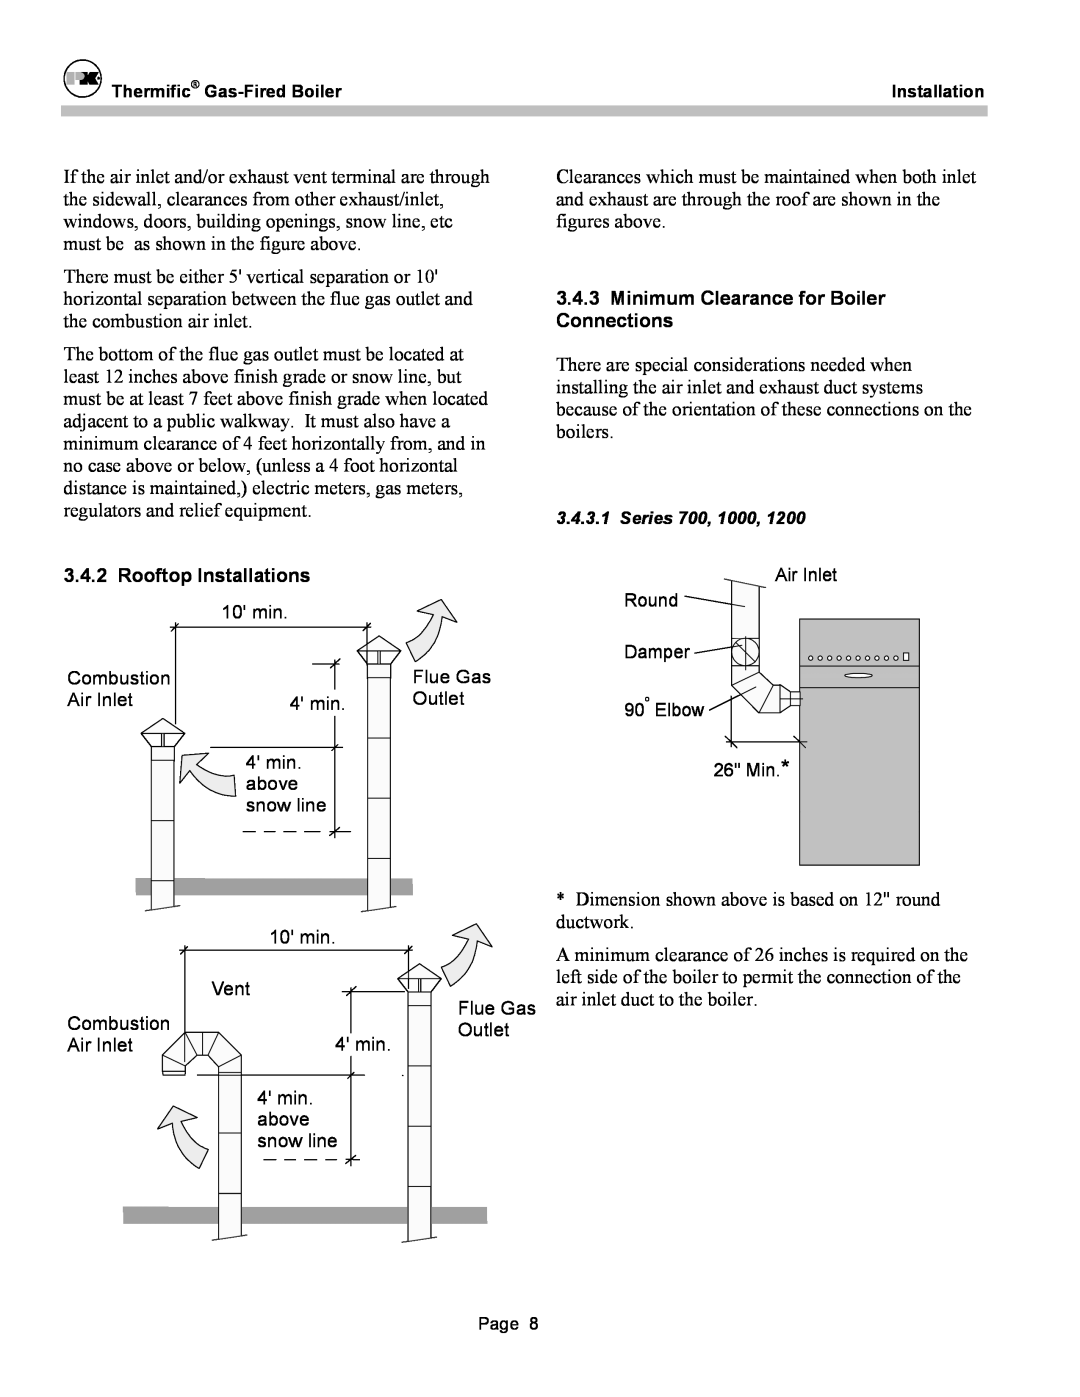 Patterson-Kelley DVSCM-02 owner manual 3.4.3Minimum Clearance for Boiler Connections 